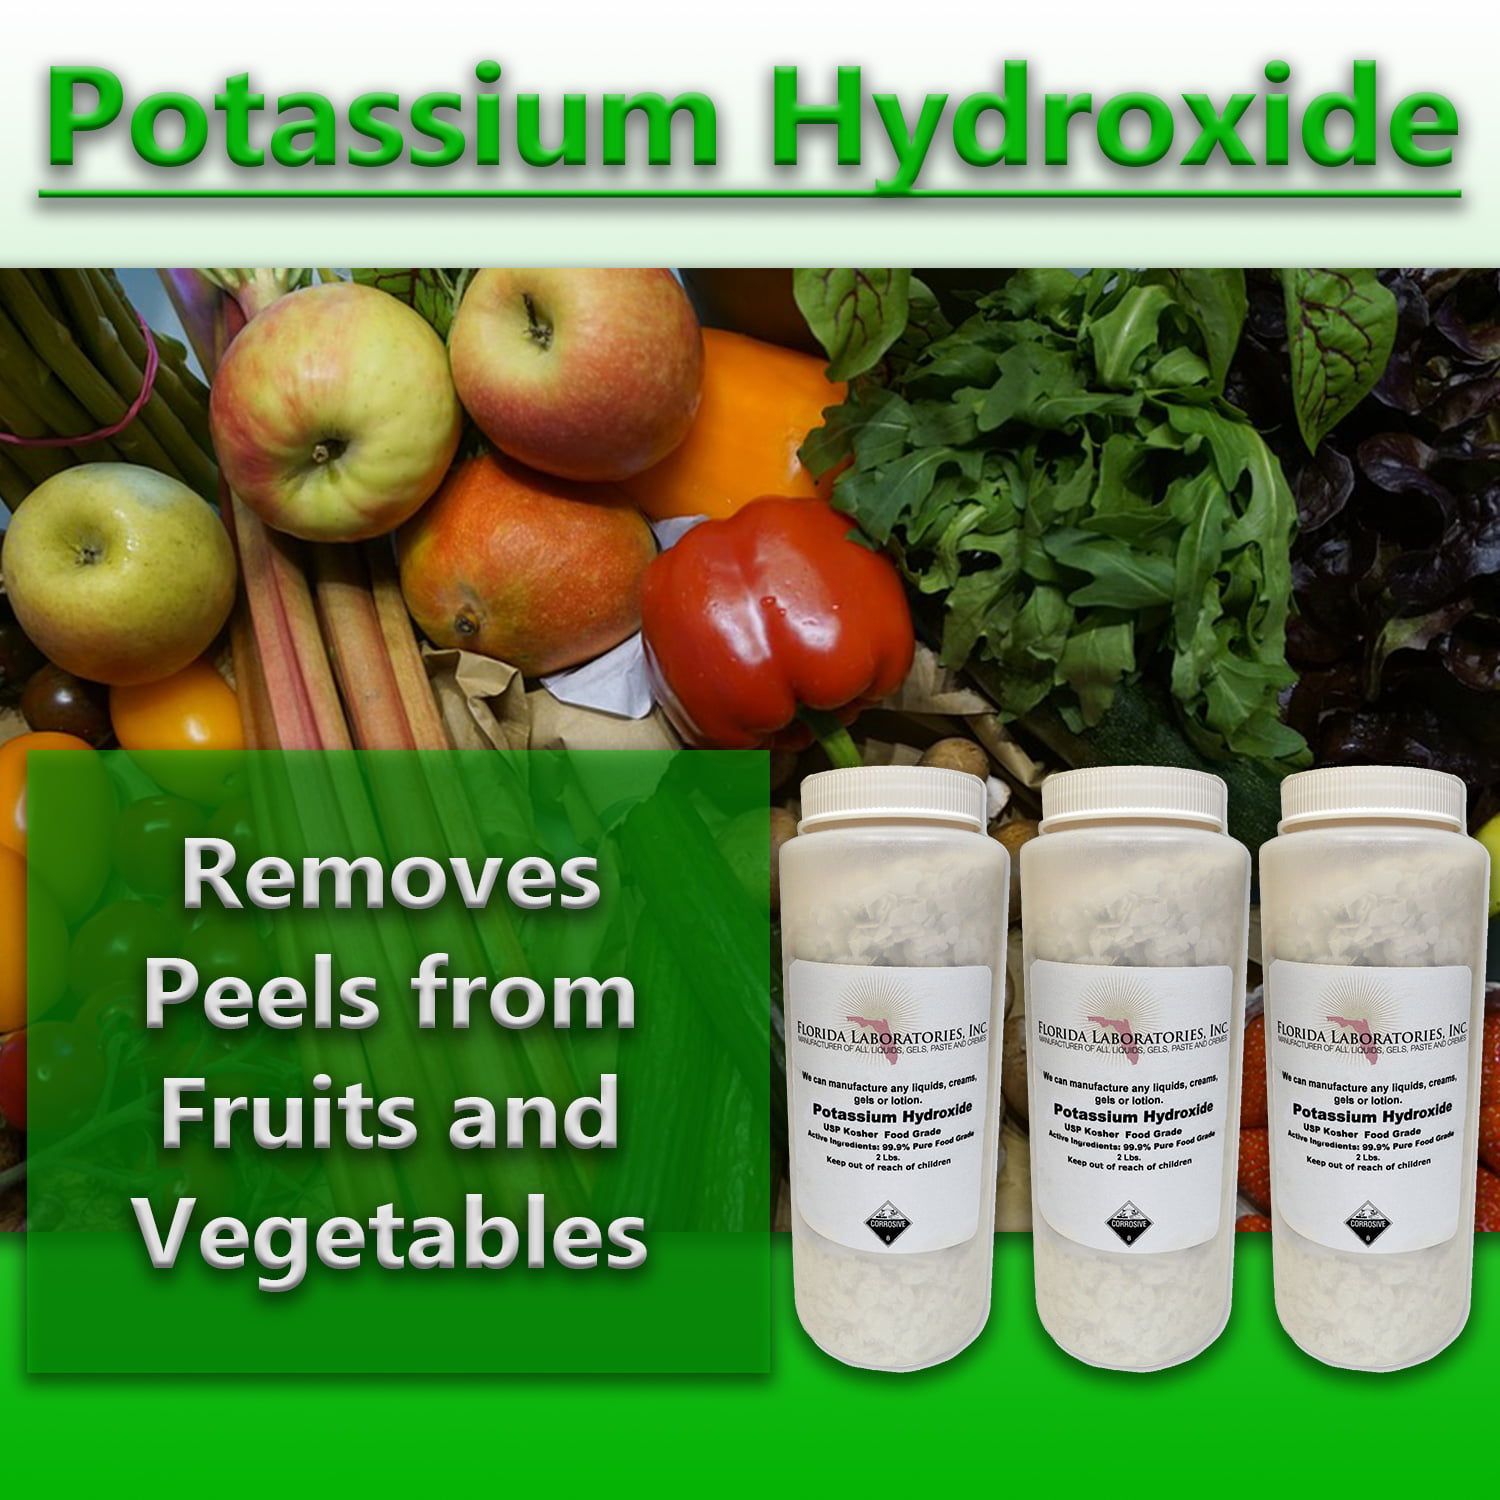 What's the Difference Between Sodium Hydroxide and Potassium Hydroxide for  Soapmaking? – RusticWise